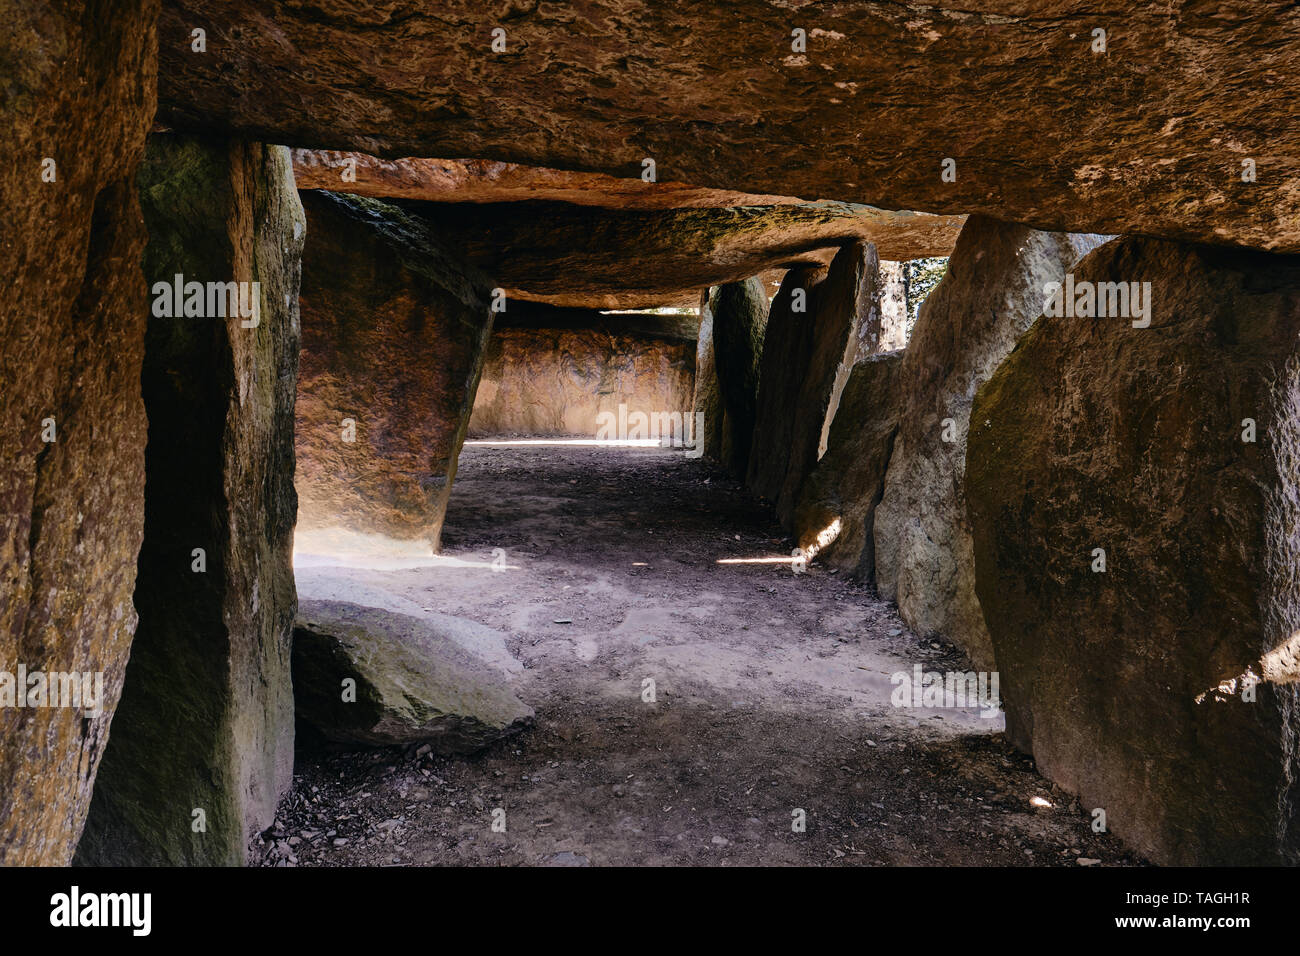 World's largest Covered Passage Burial site Stock Photo